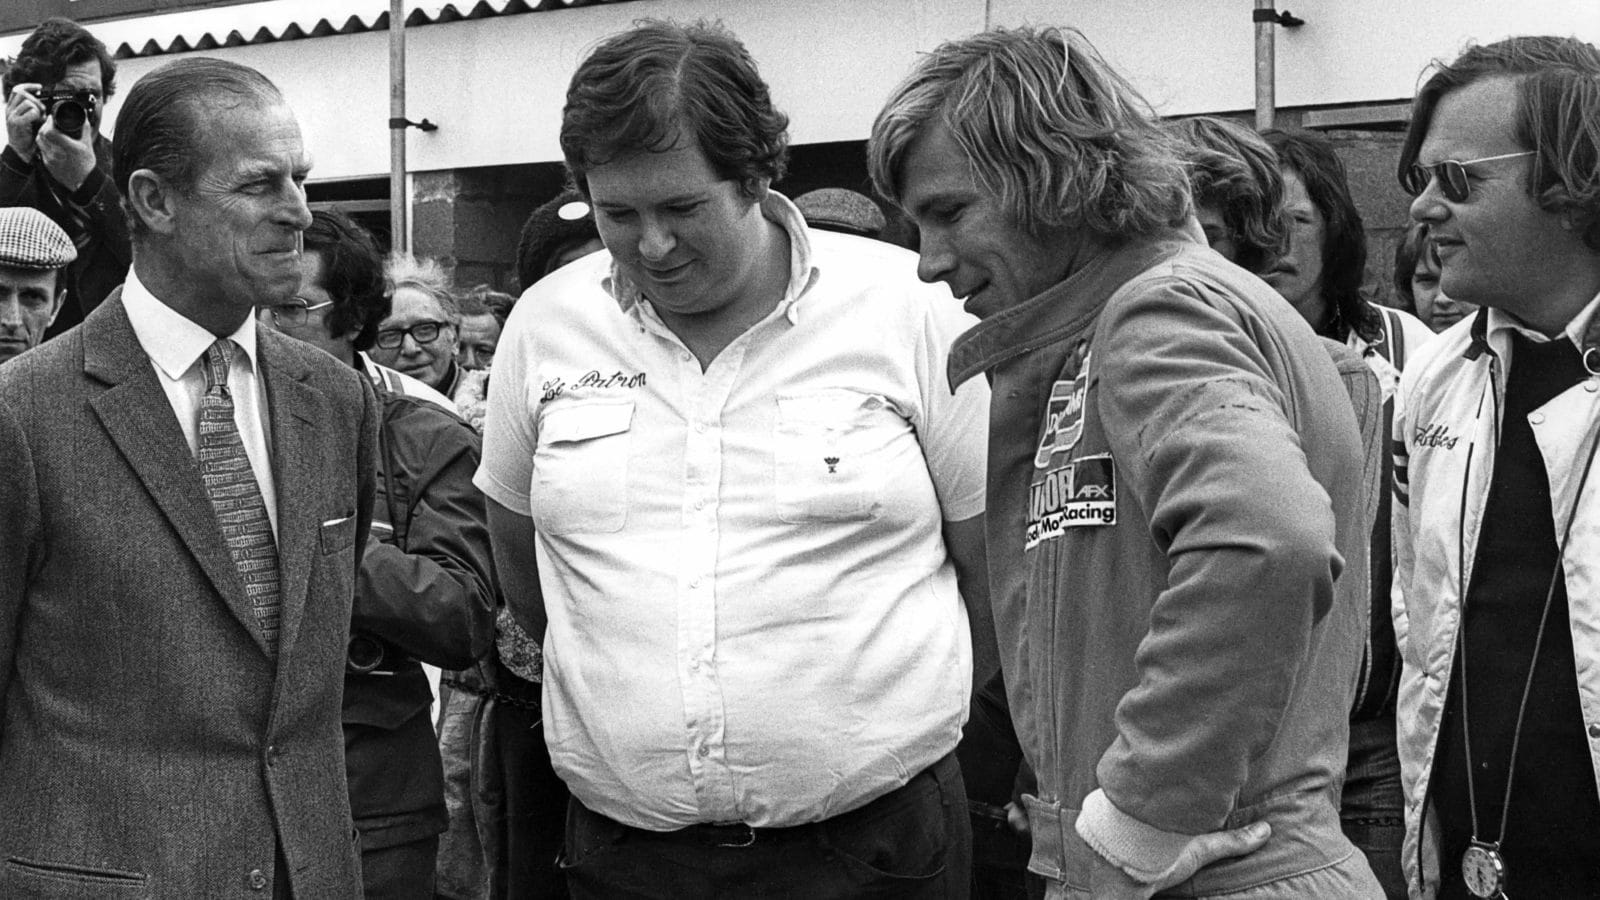 Prince Philip with Lord Hesketh and James Hunt